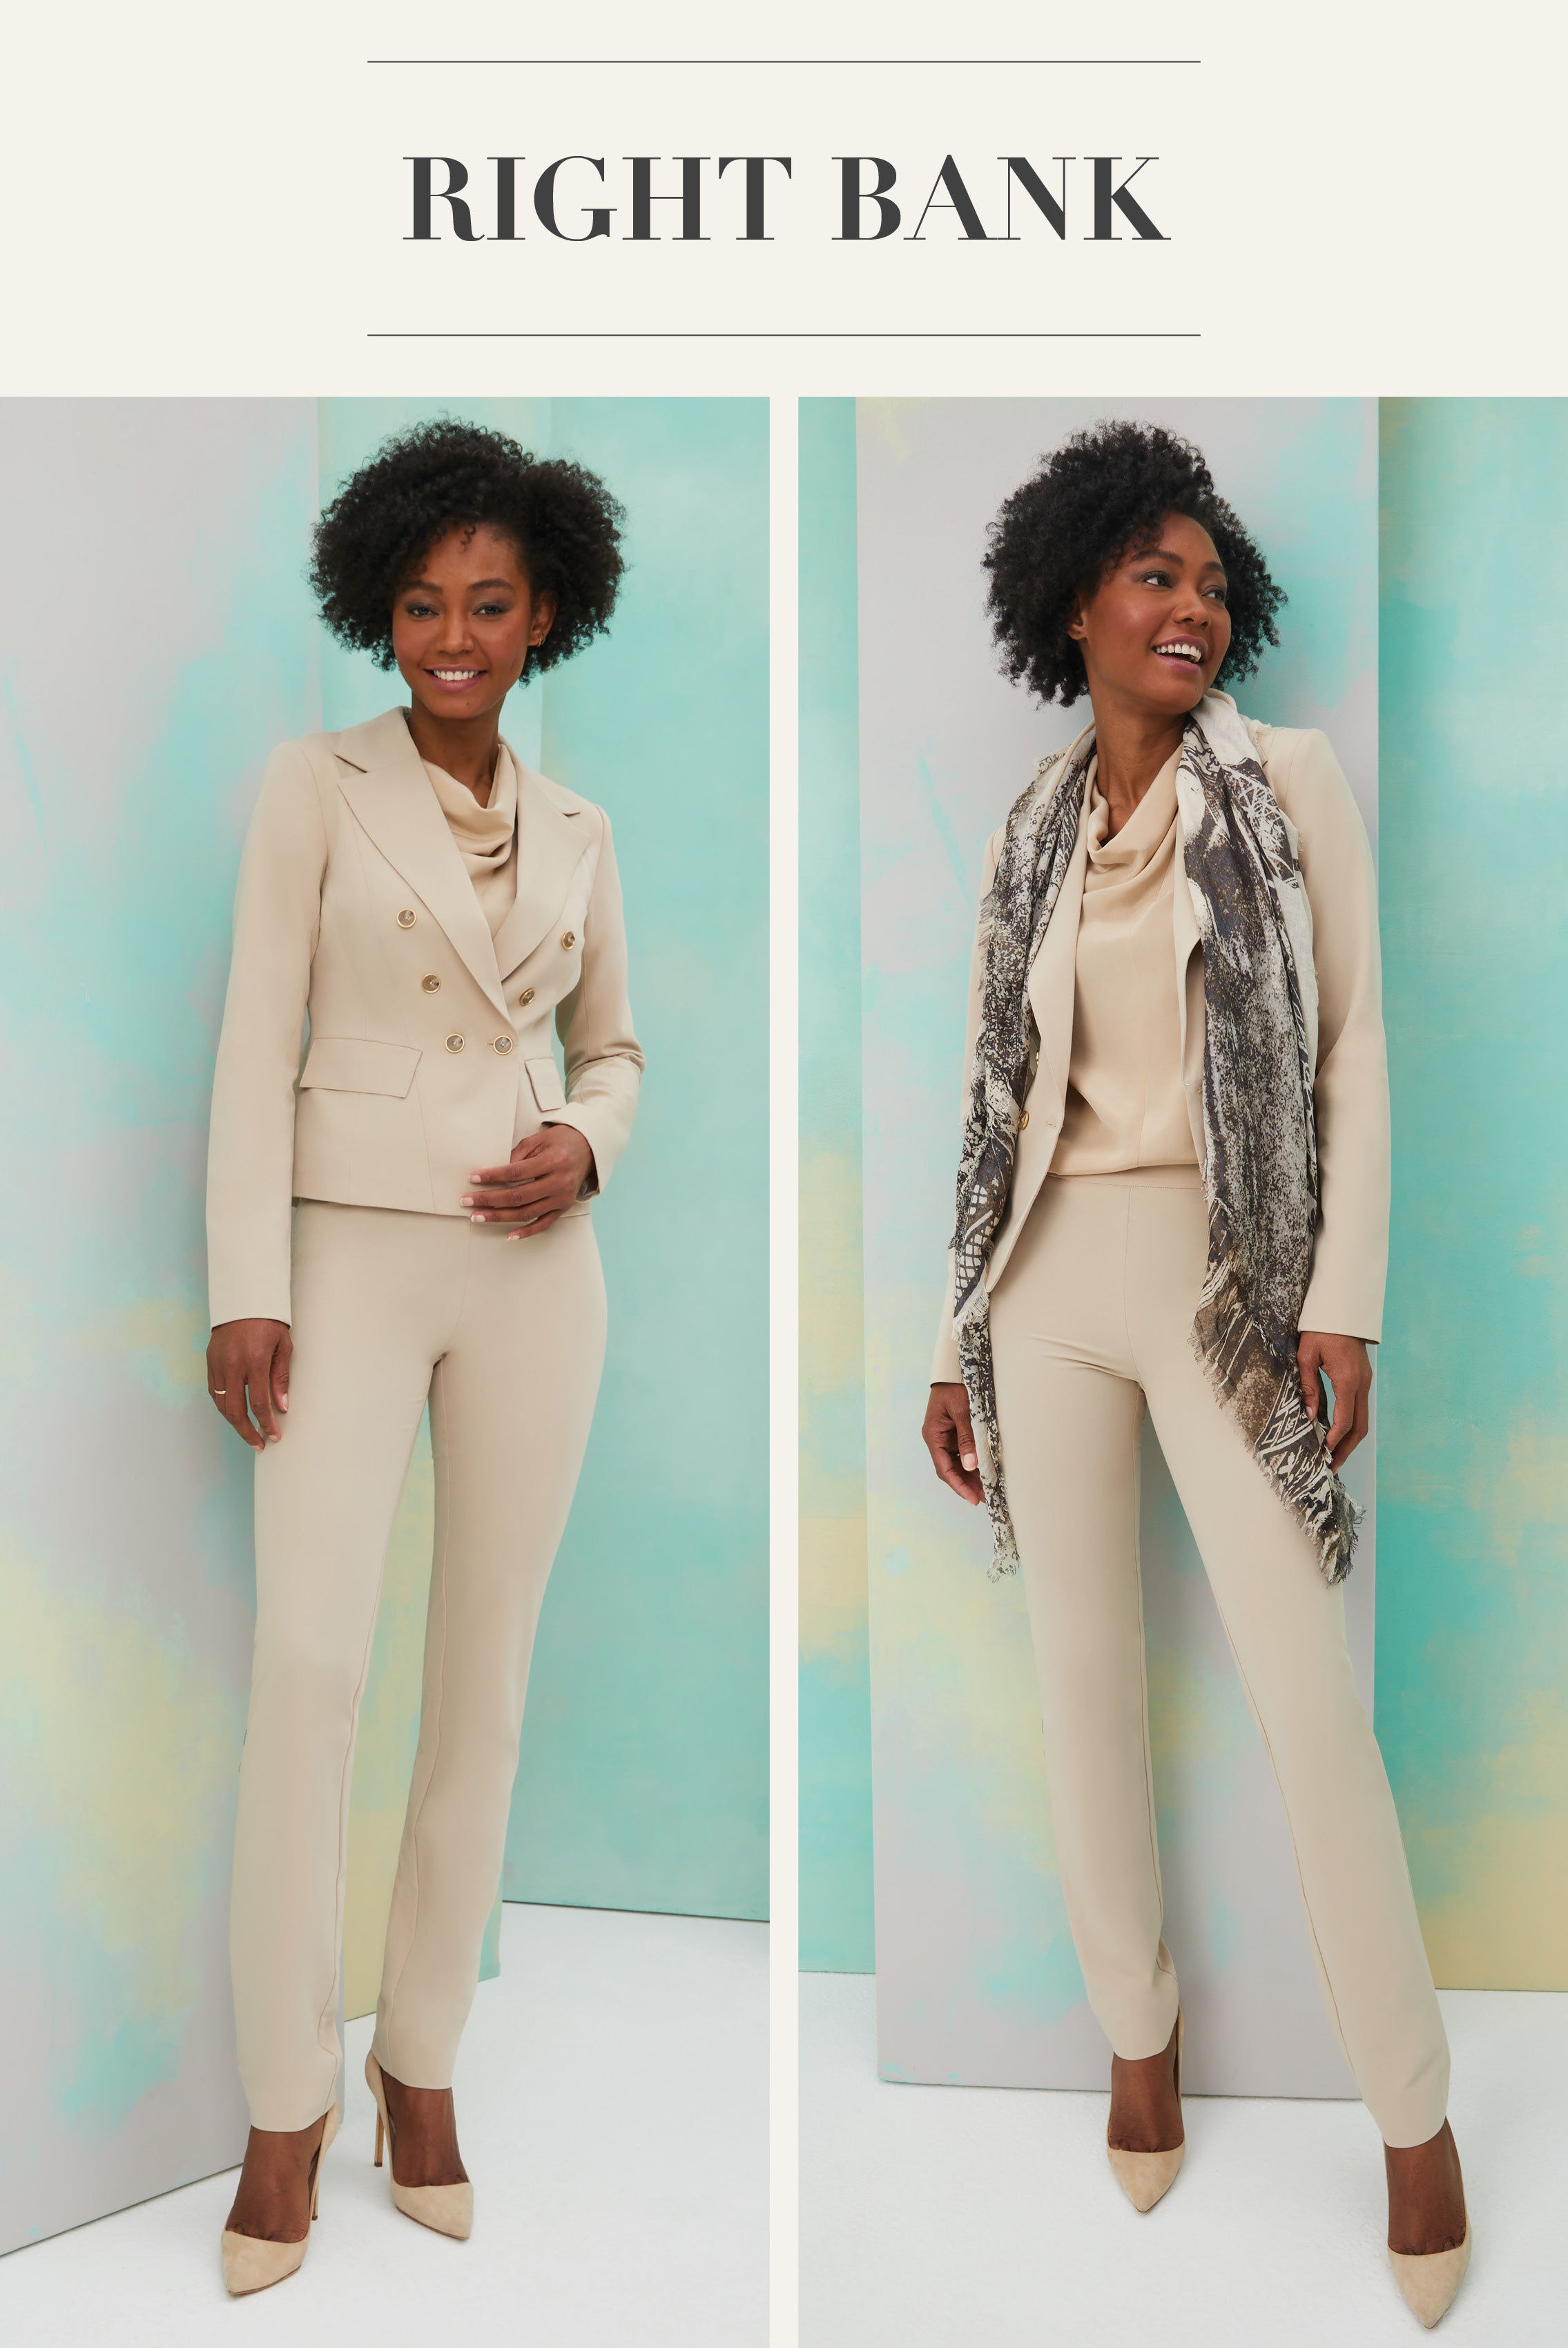 Spring catalog in Right Bank section of model wearing Right Bank pant and Right Bank jacket.